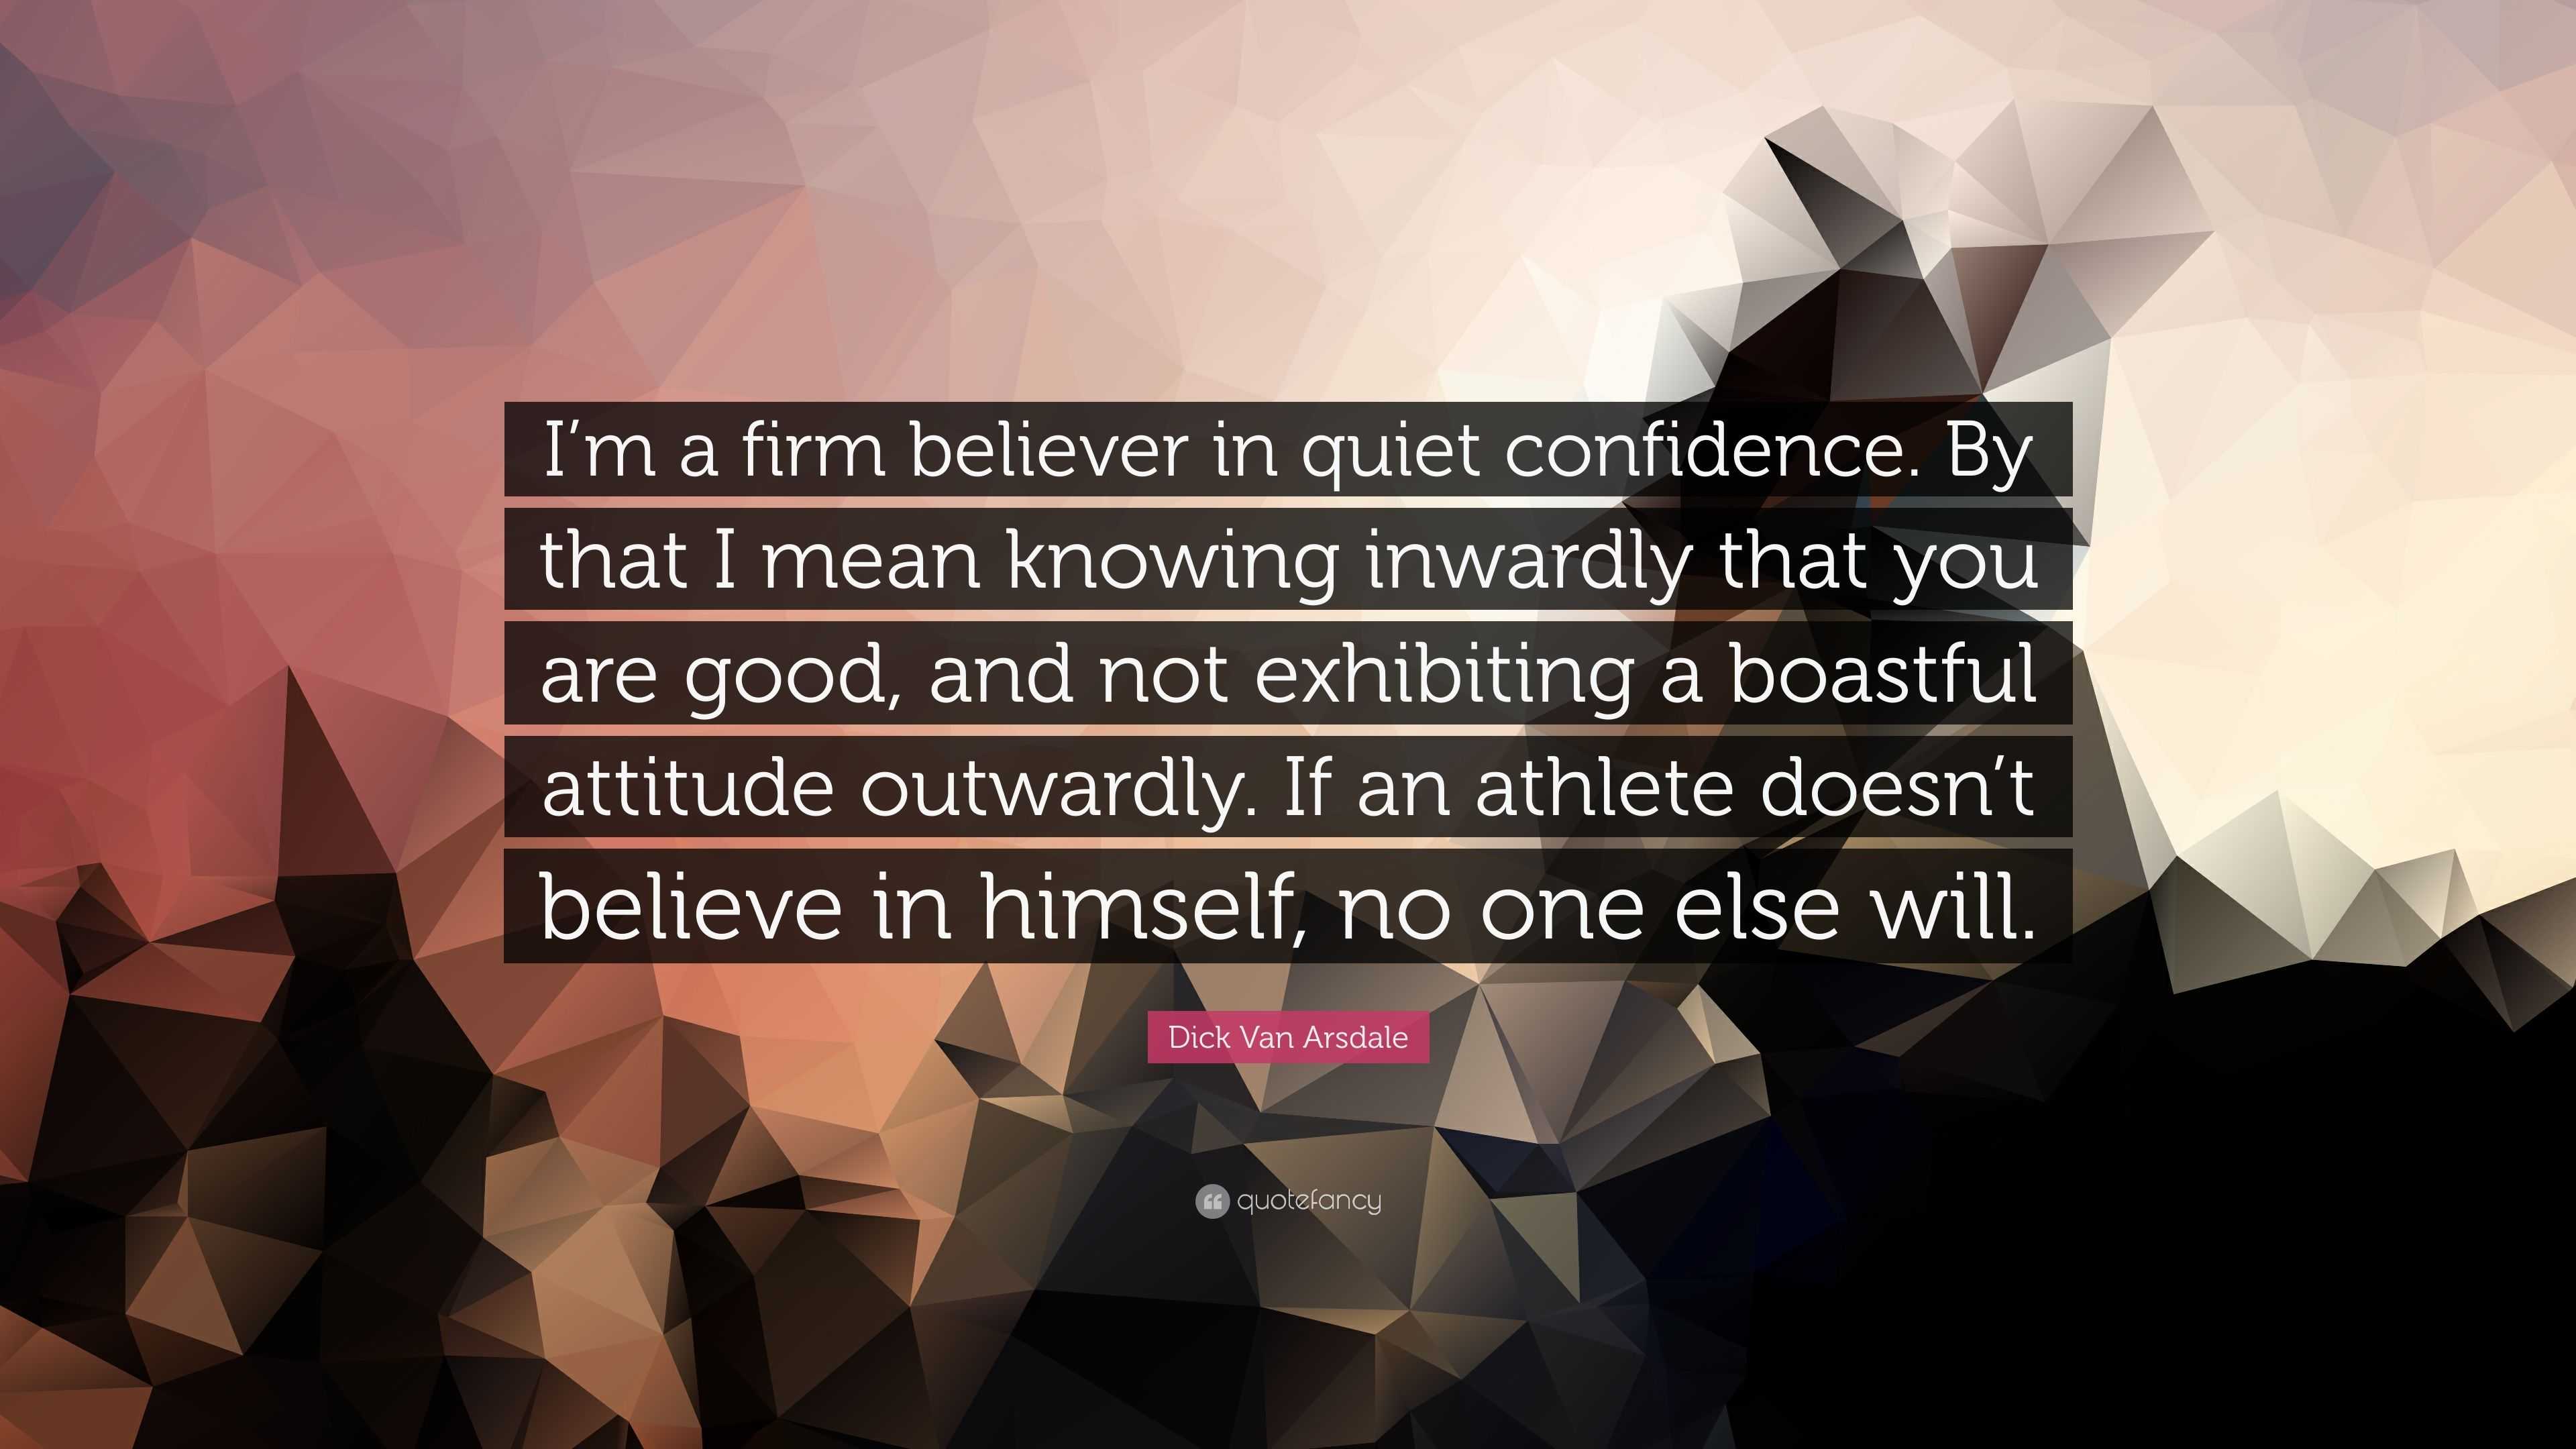 https://quotefancy.com/media/wallpaper/3840x2160/3286991-Dick-Van-Arsdale-Quote-I-m-a-firm-believer-in-quiet-confidence-By.jpg